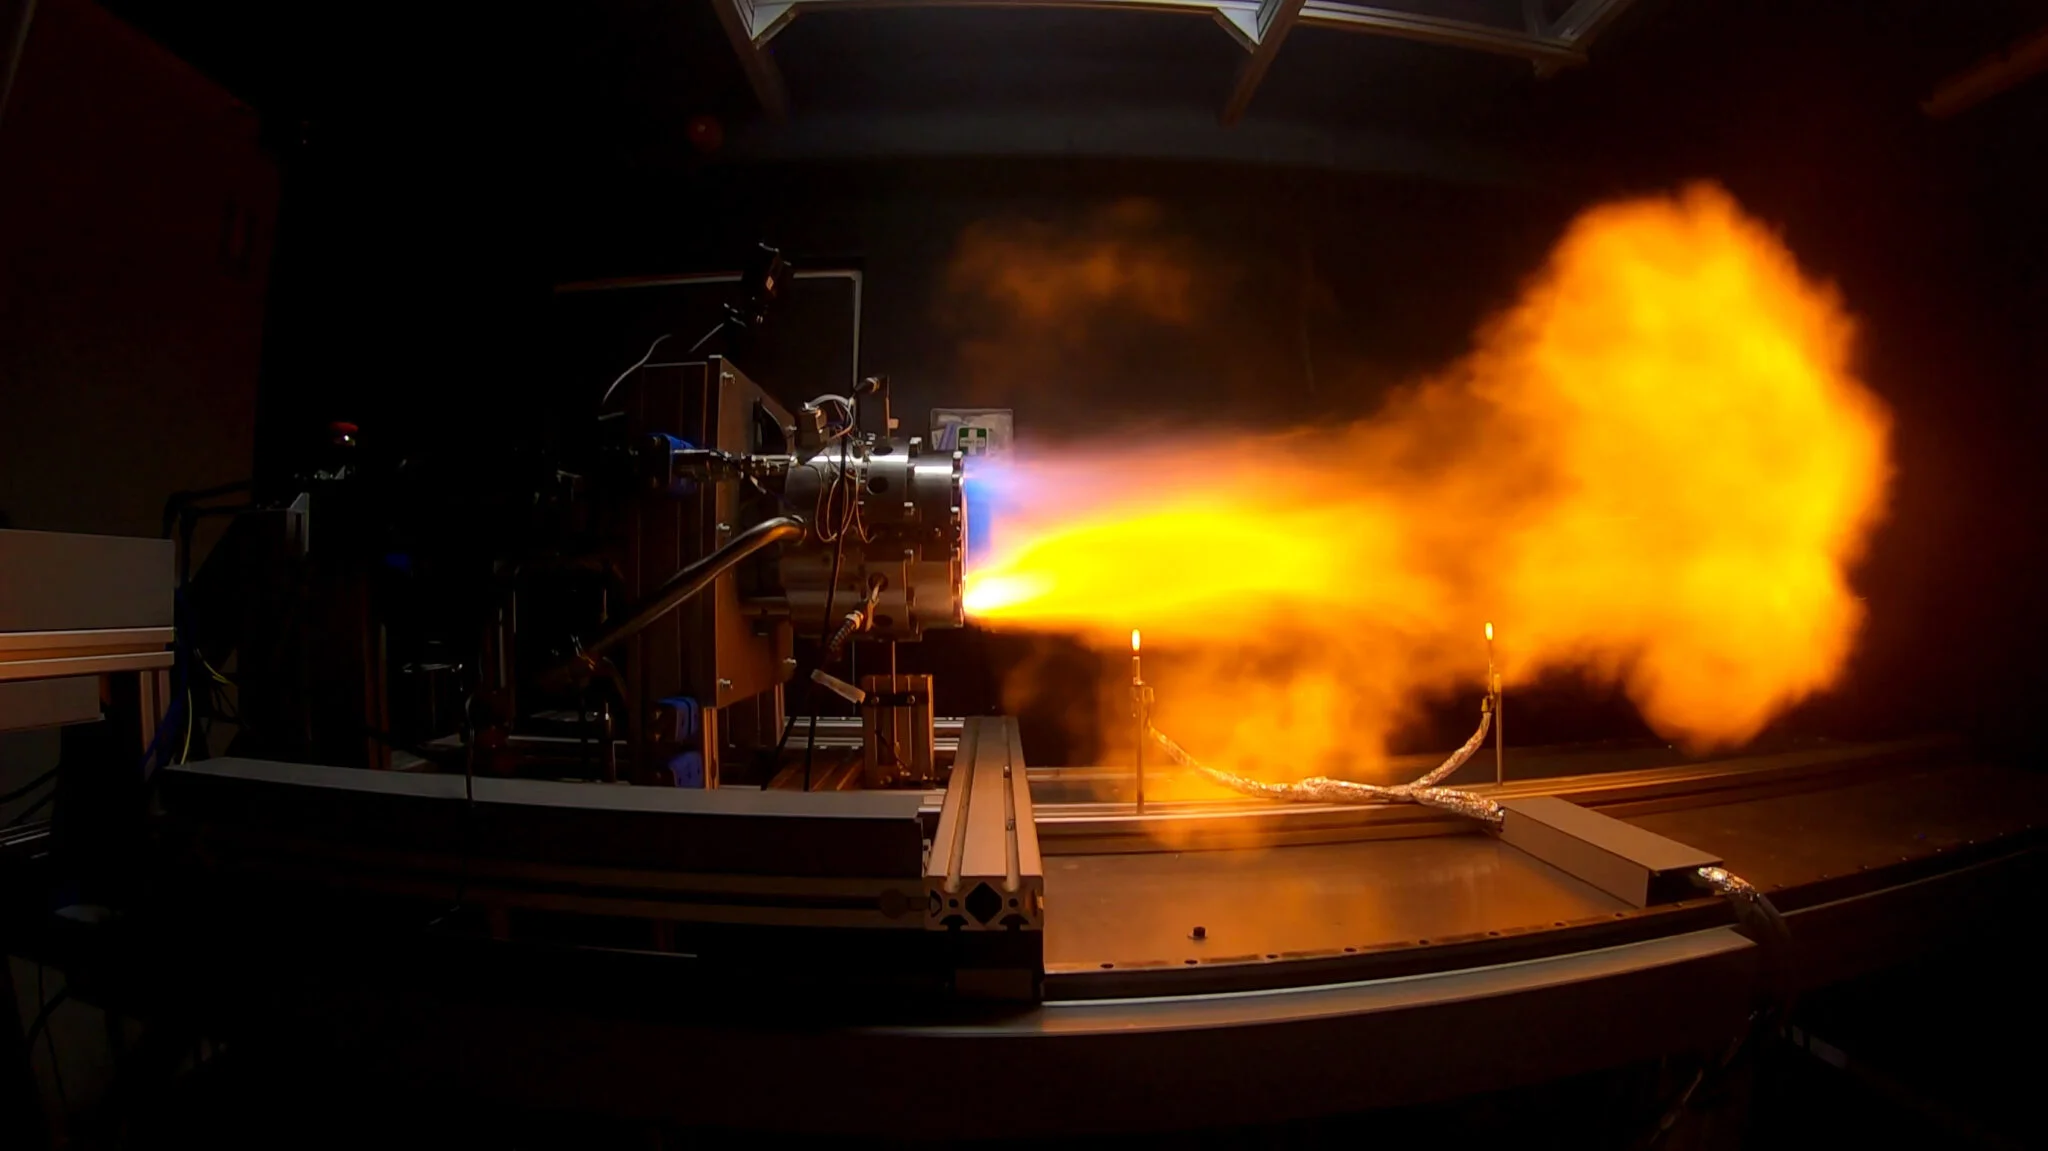 China has created a new type of rocket engine